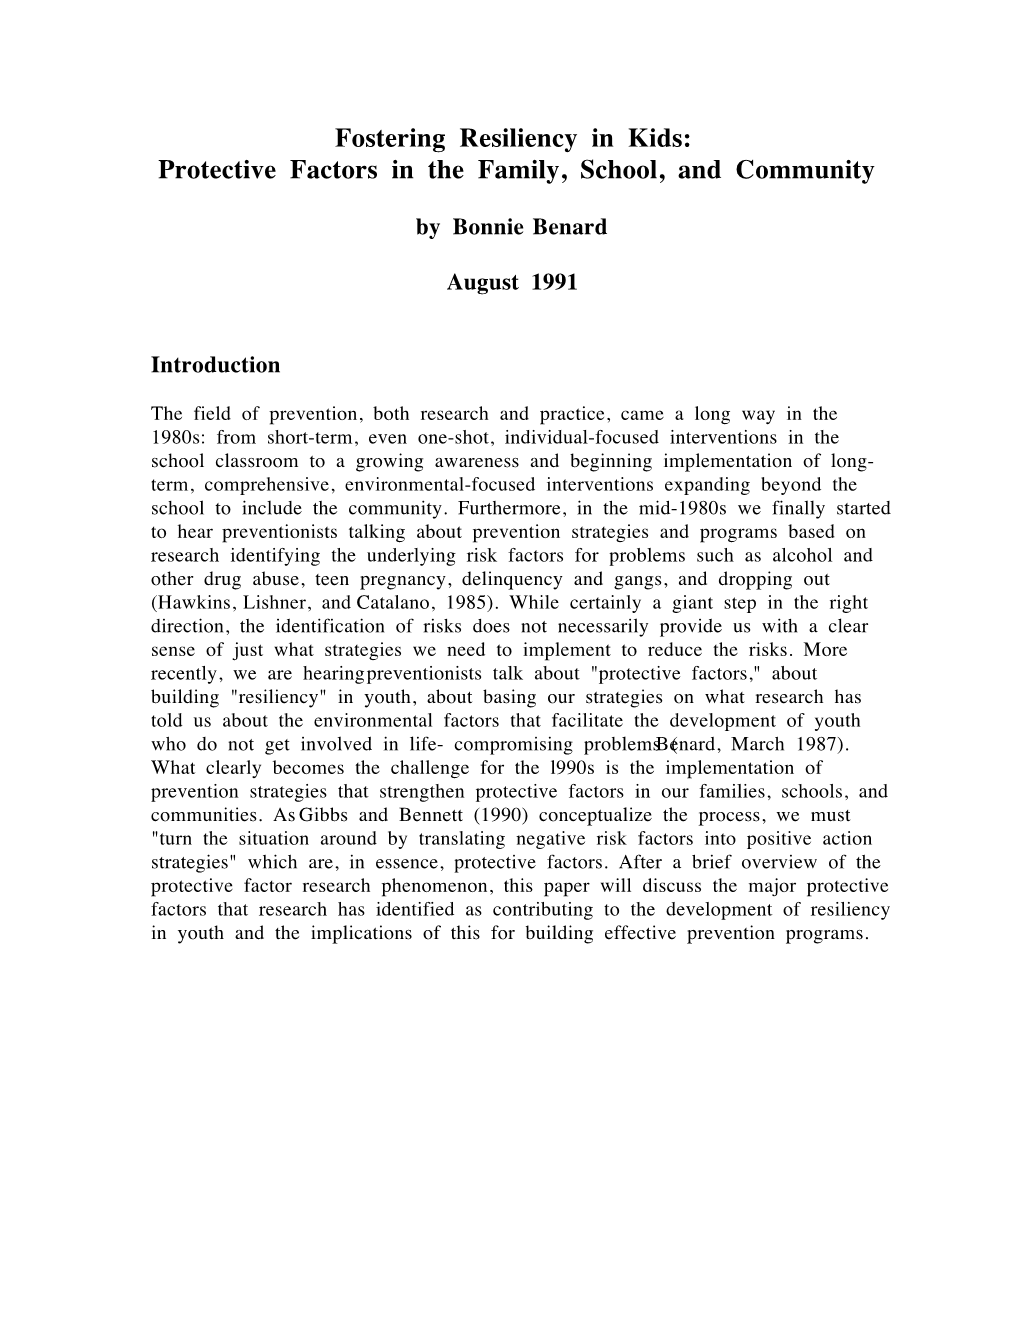 Protective Factors in the Family, School, and Community